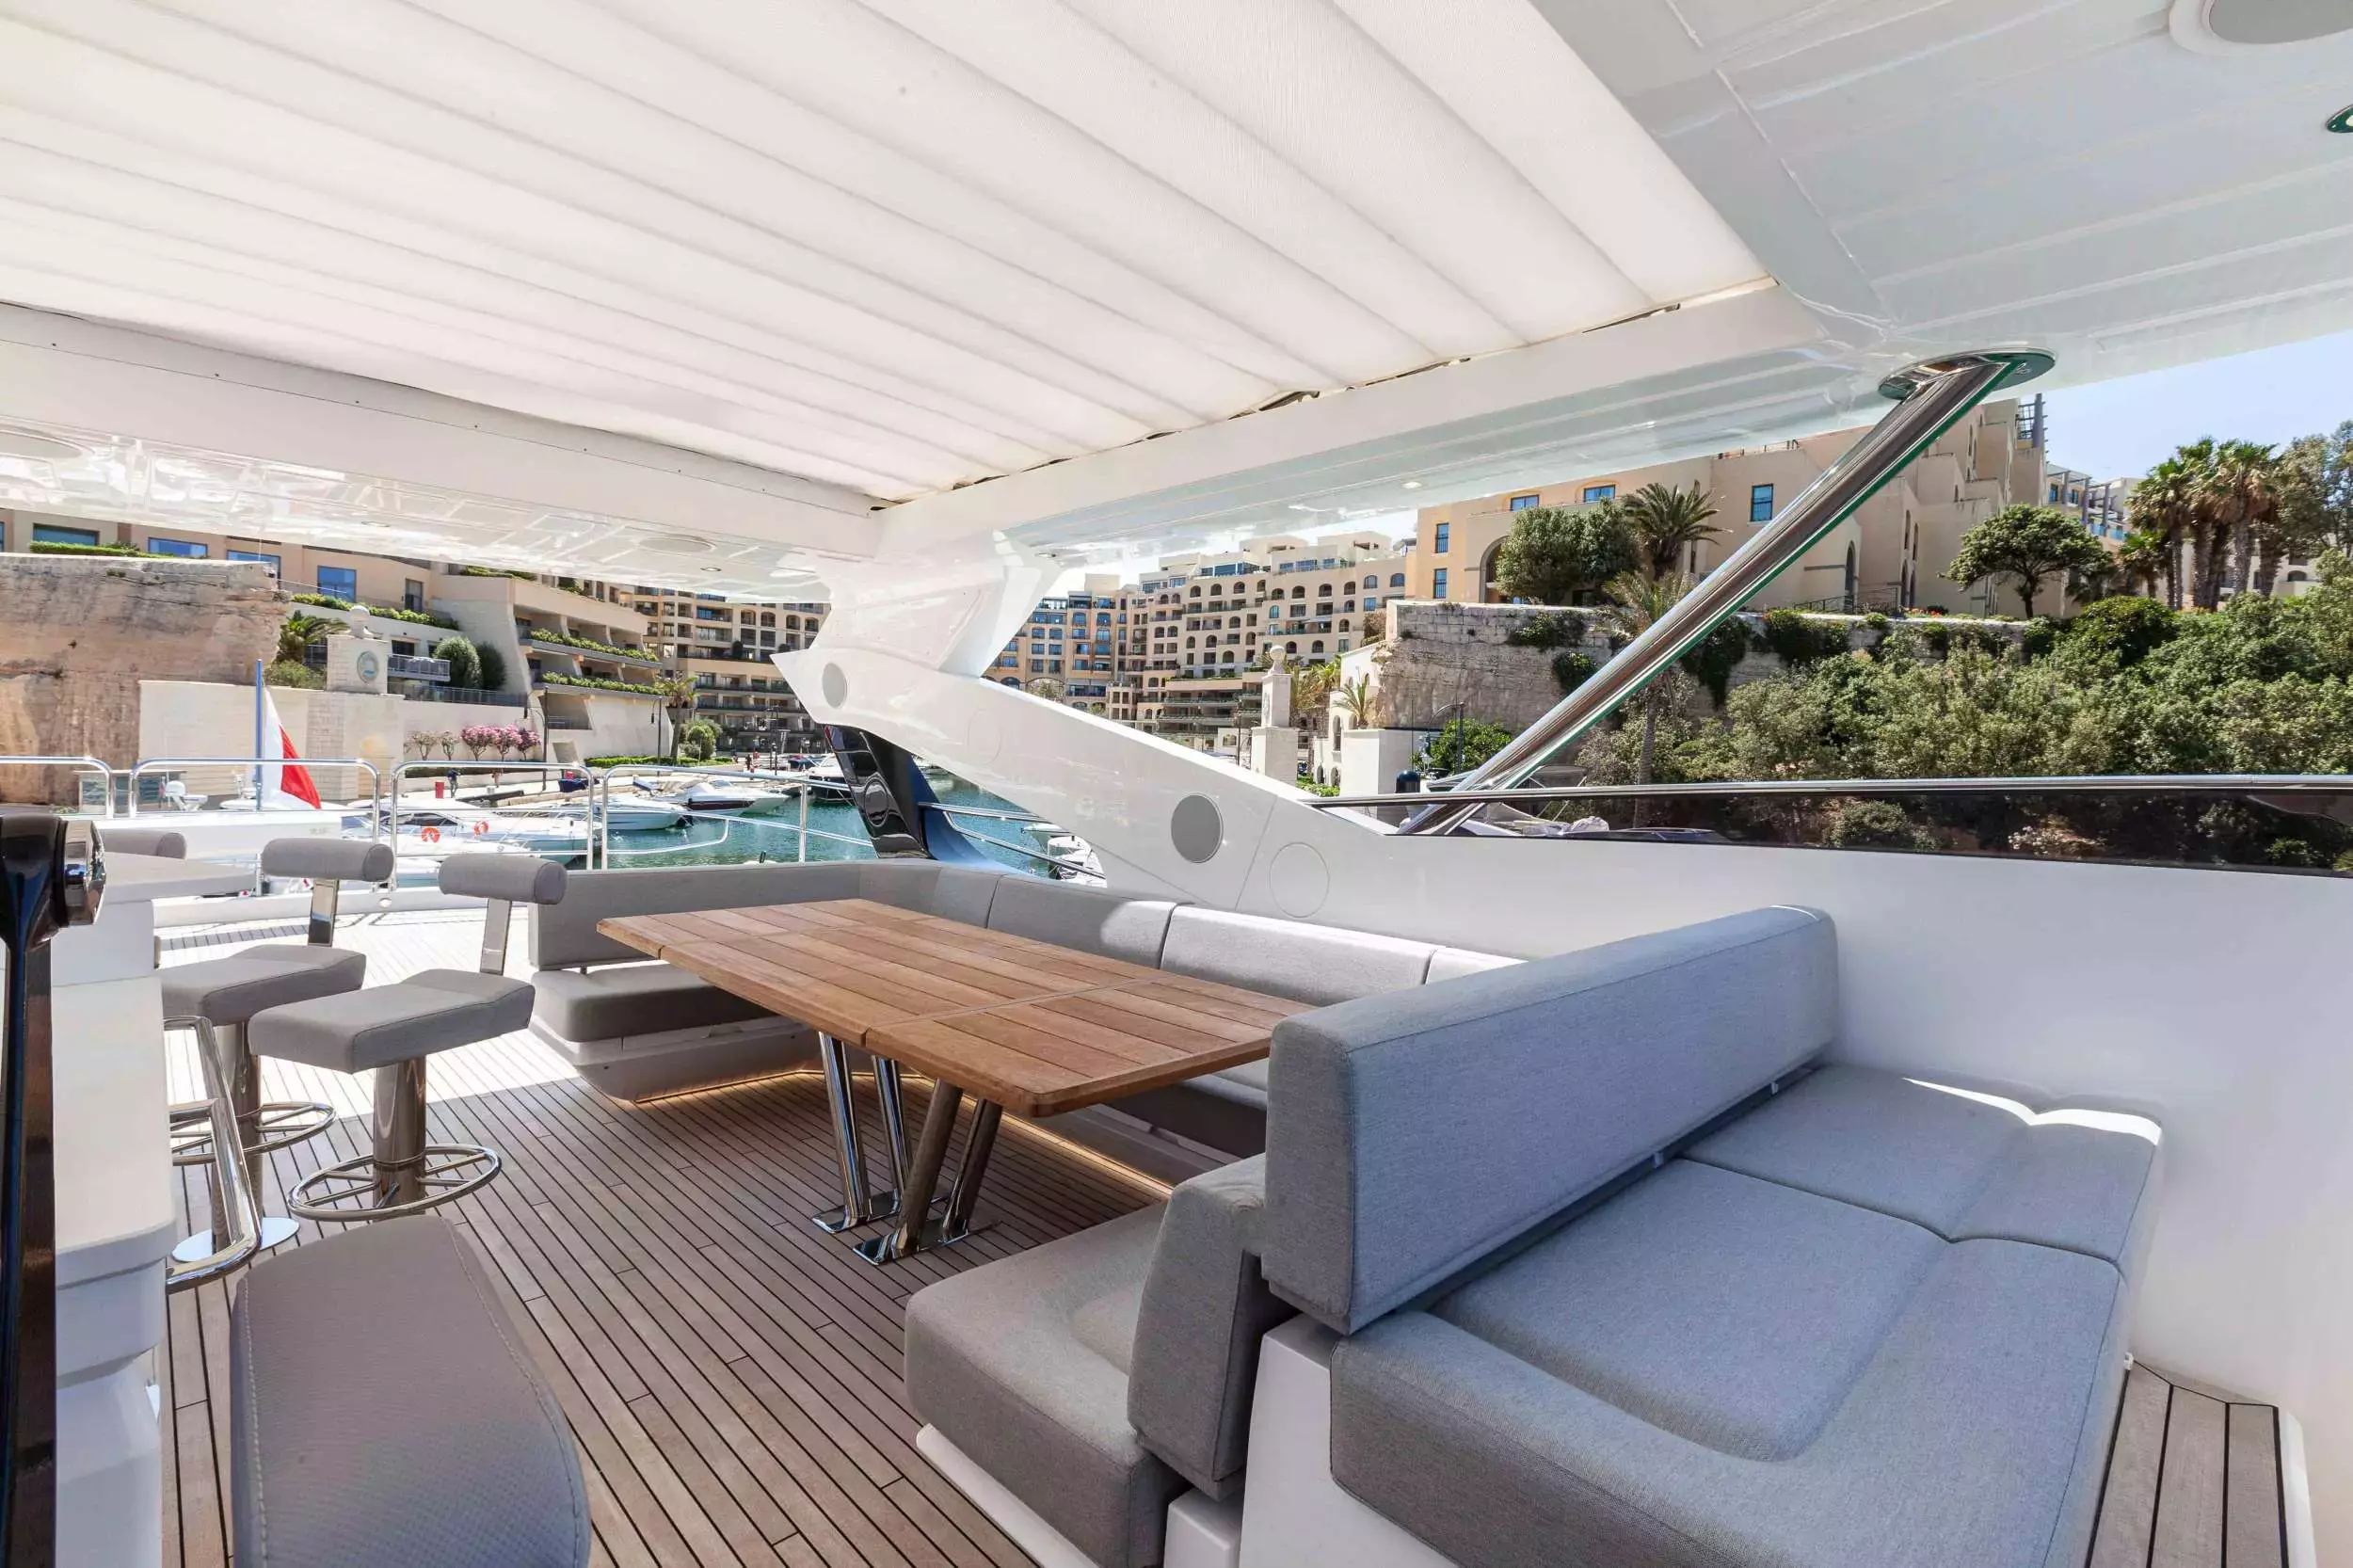 New Edge by Sunseeker - Top rates for a Charter of a private Superyacht in Turkey